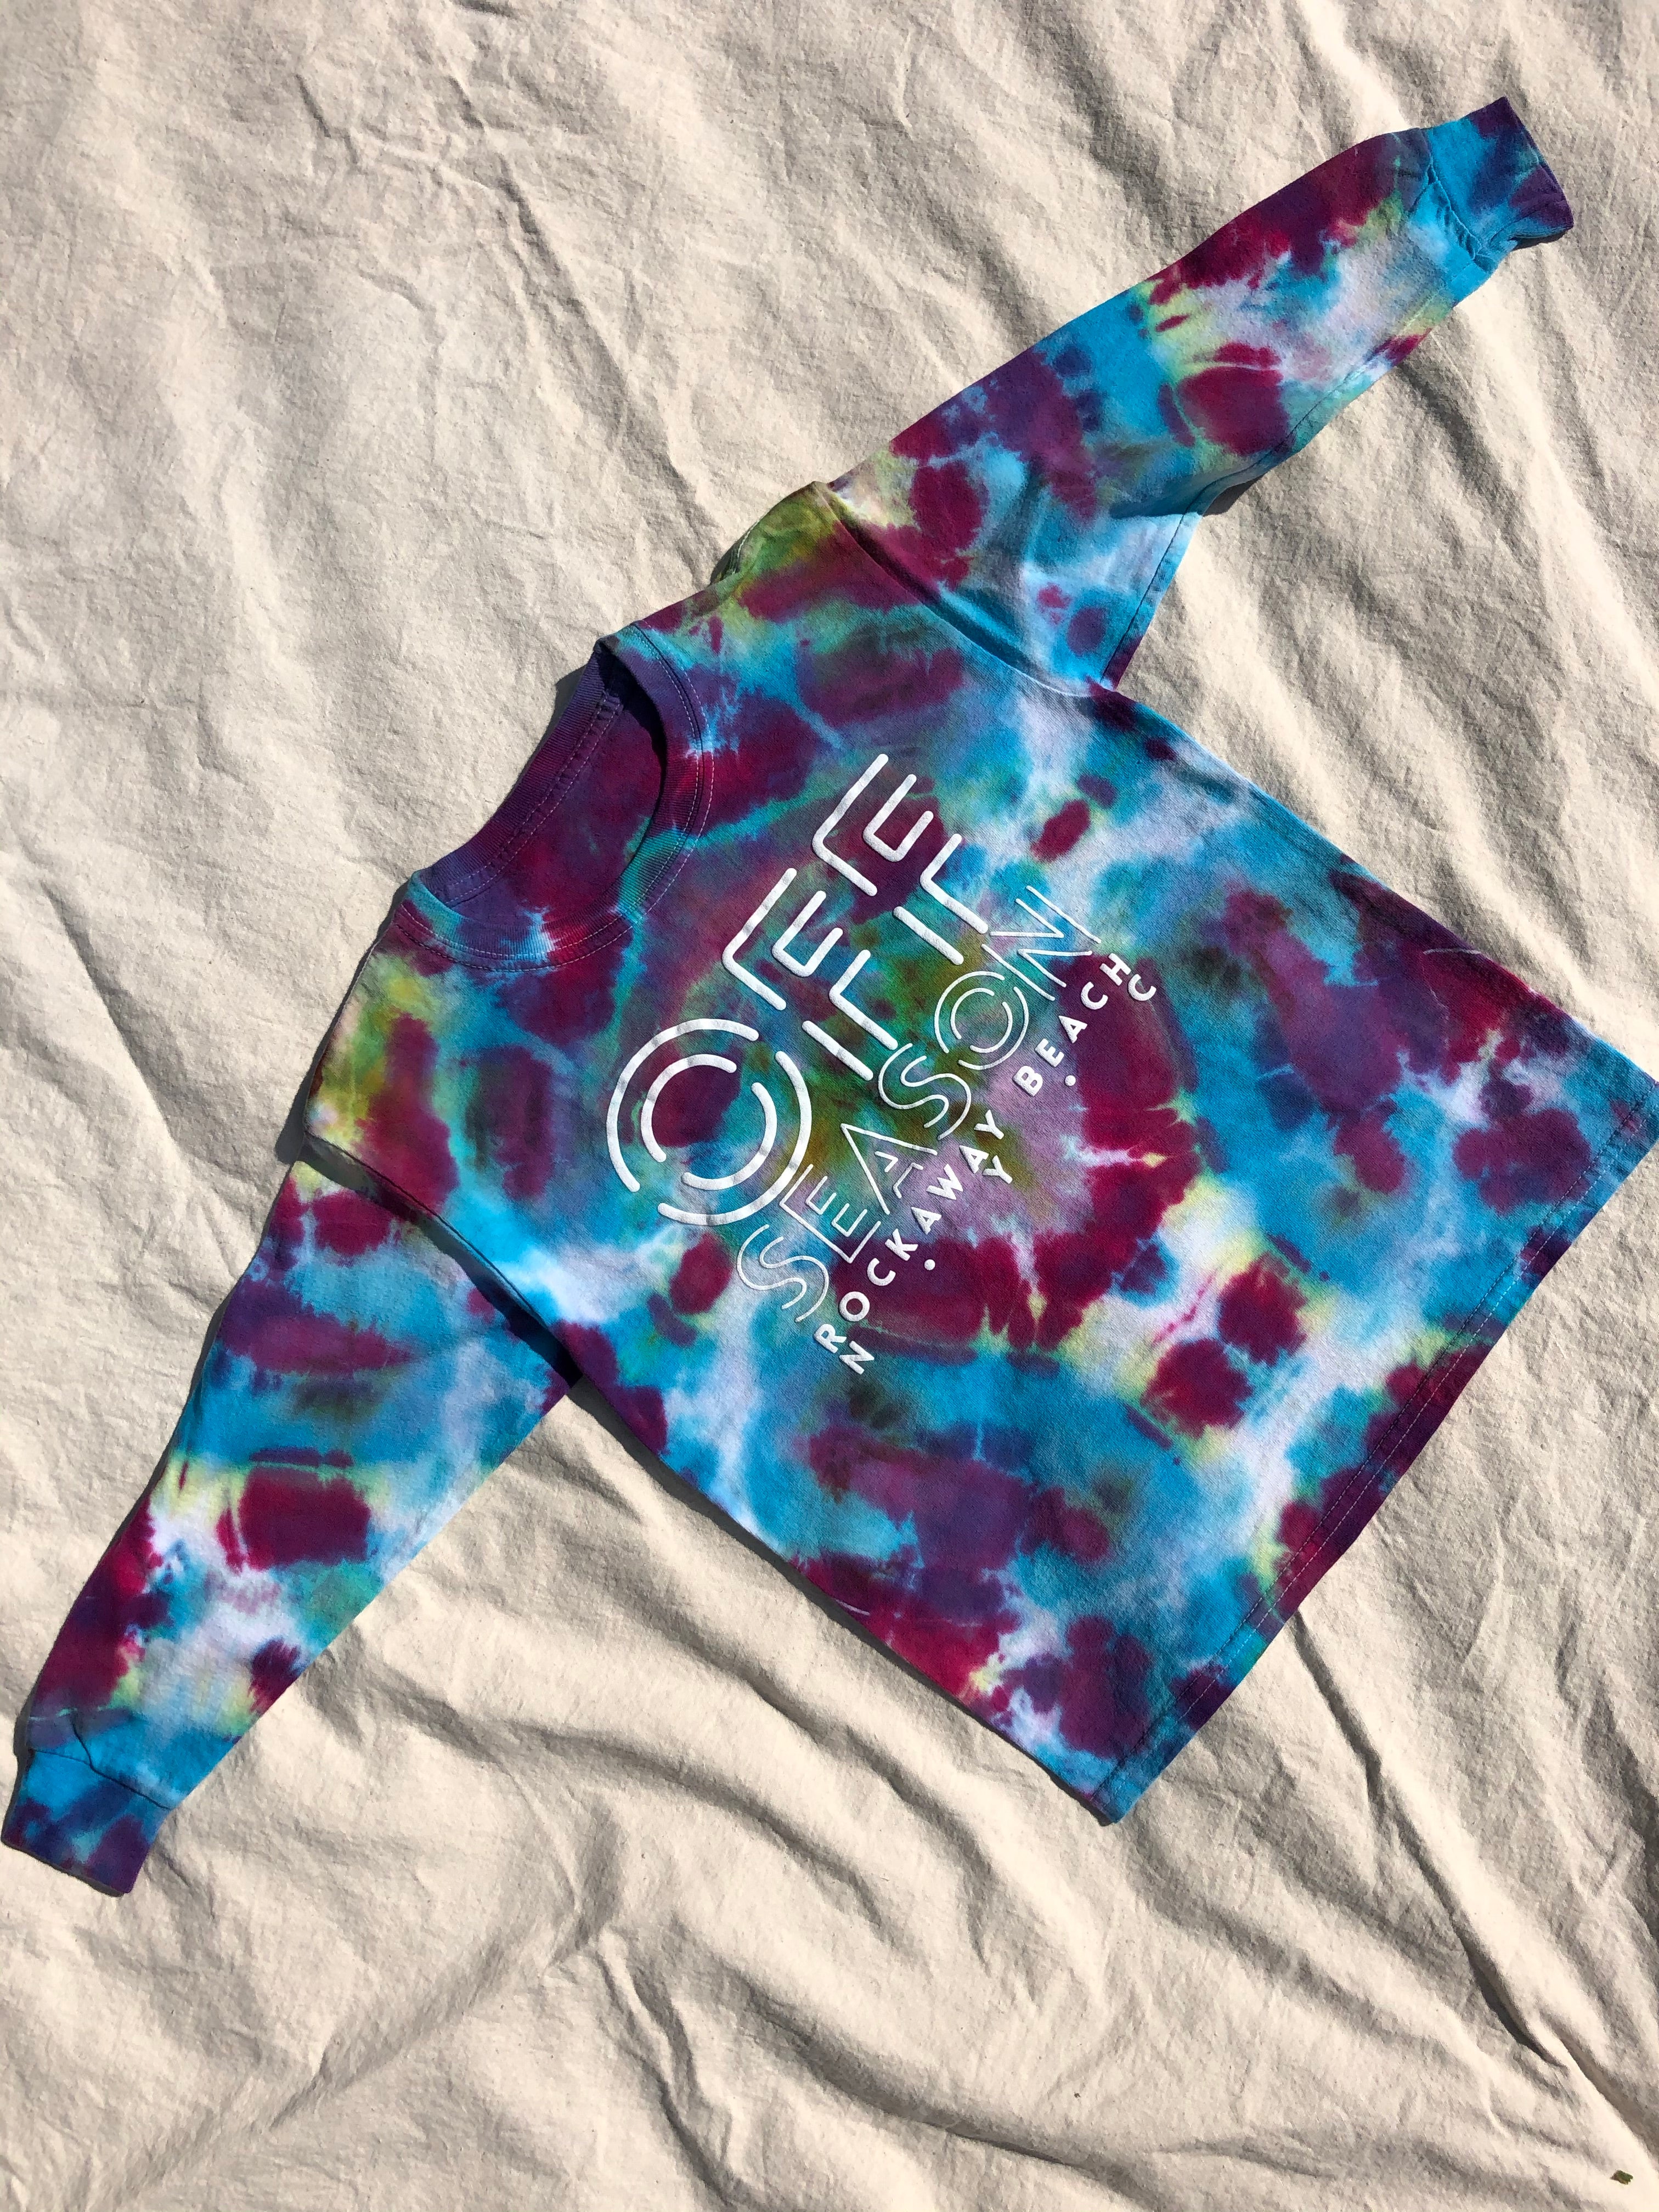 Youth Tie Dye Top #13 (size S)